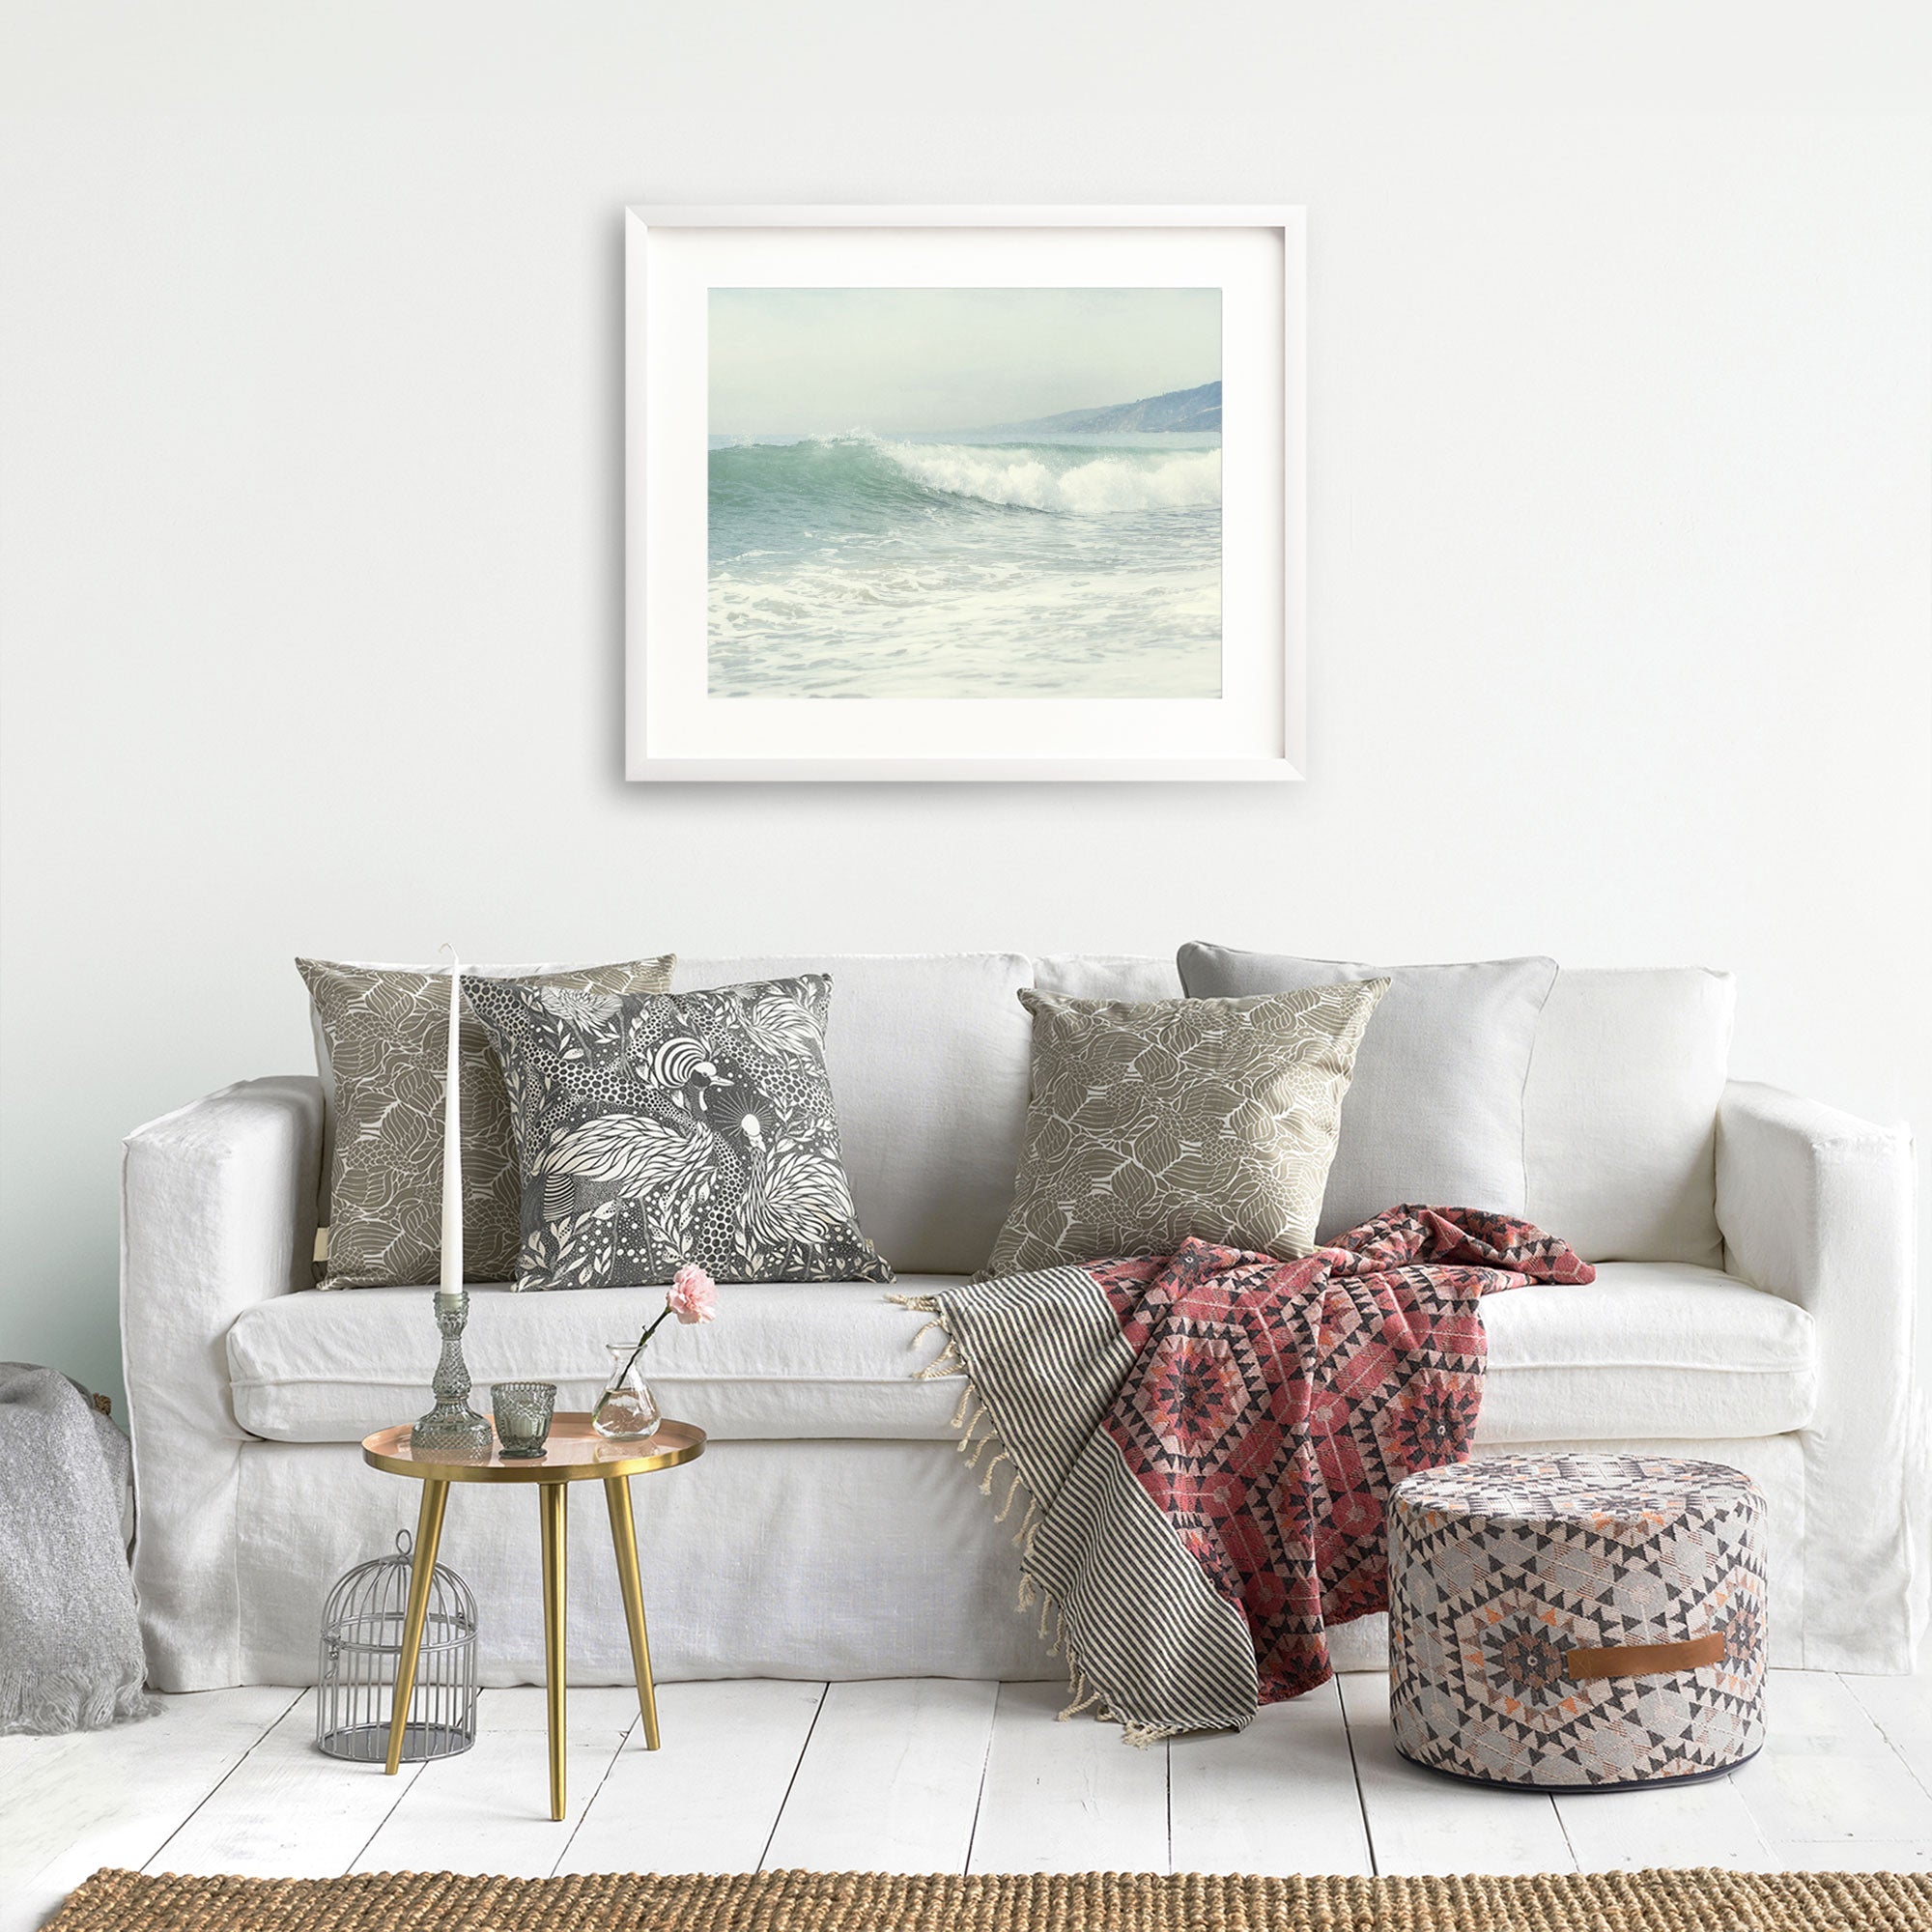 A cozy living room setup featuring a white sofa with patterned throw pillows, a draped red and gray blanket, a round gold side table with decor, a pouffe, and Offley Green&#39;s &#39;Breaking Surf&#39; coastal print wall.